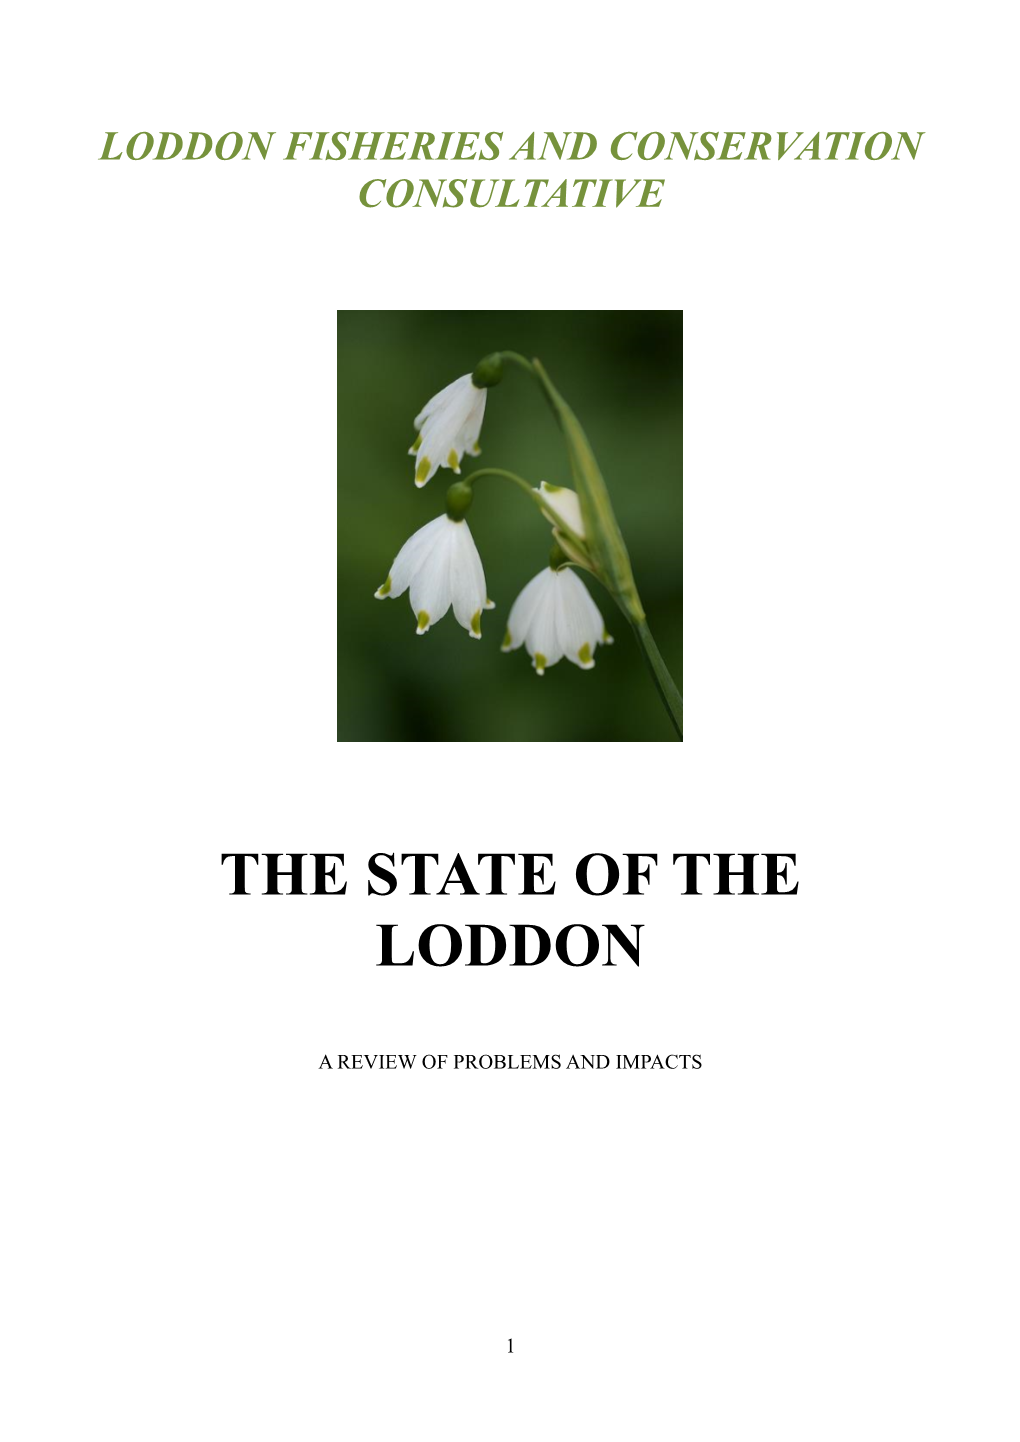 The State of the Loddon